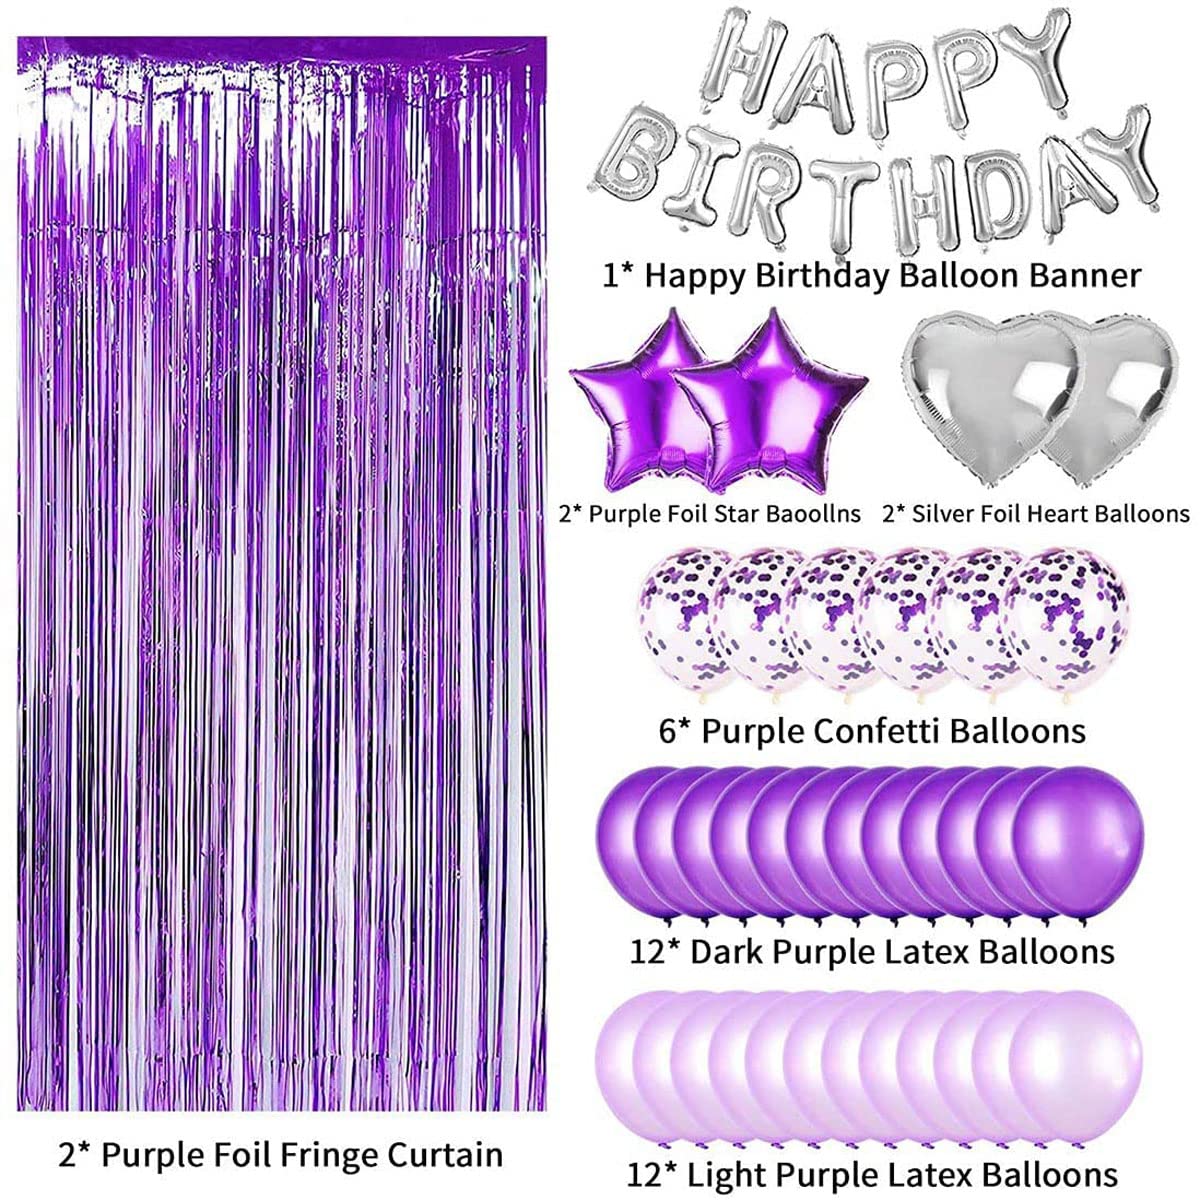 Lavender Party Decorations, Purple Happy Birthday Decorations for Women or Girl, Purple Party Decorations Set, Tassel Garland Balloons for Birthday Party Decorations Supplies